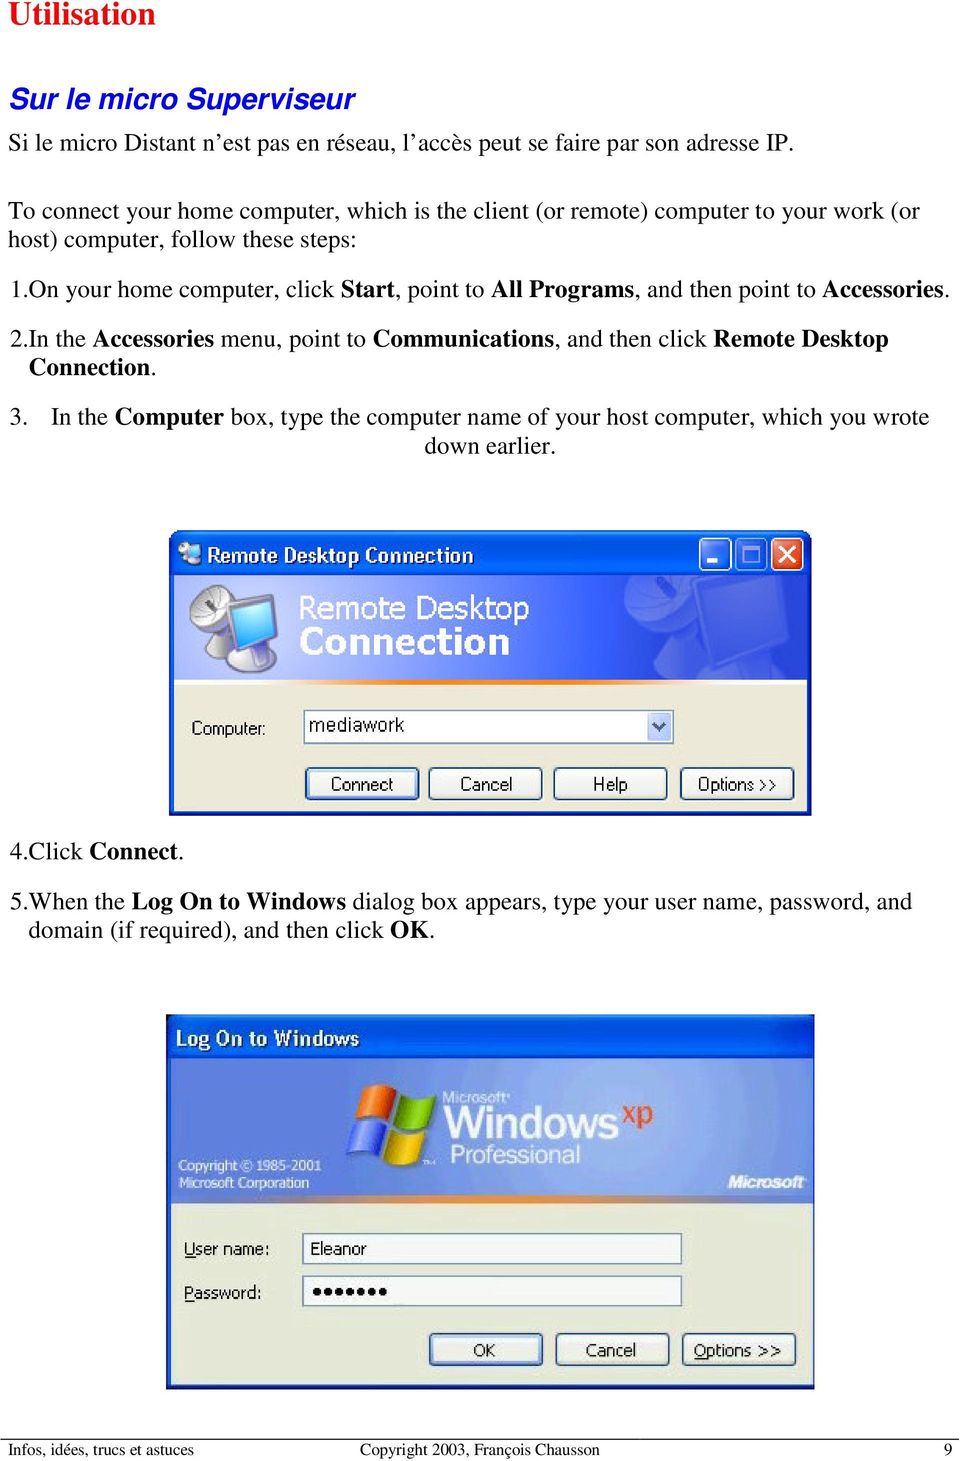 On your home computer, click Start, point to All Programs, and then point to Accessories. 2.In the Accessories menu, point to Communications, and then click Remote Desktop Connection.